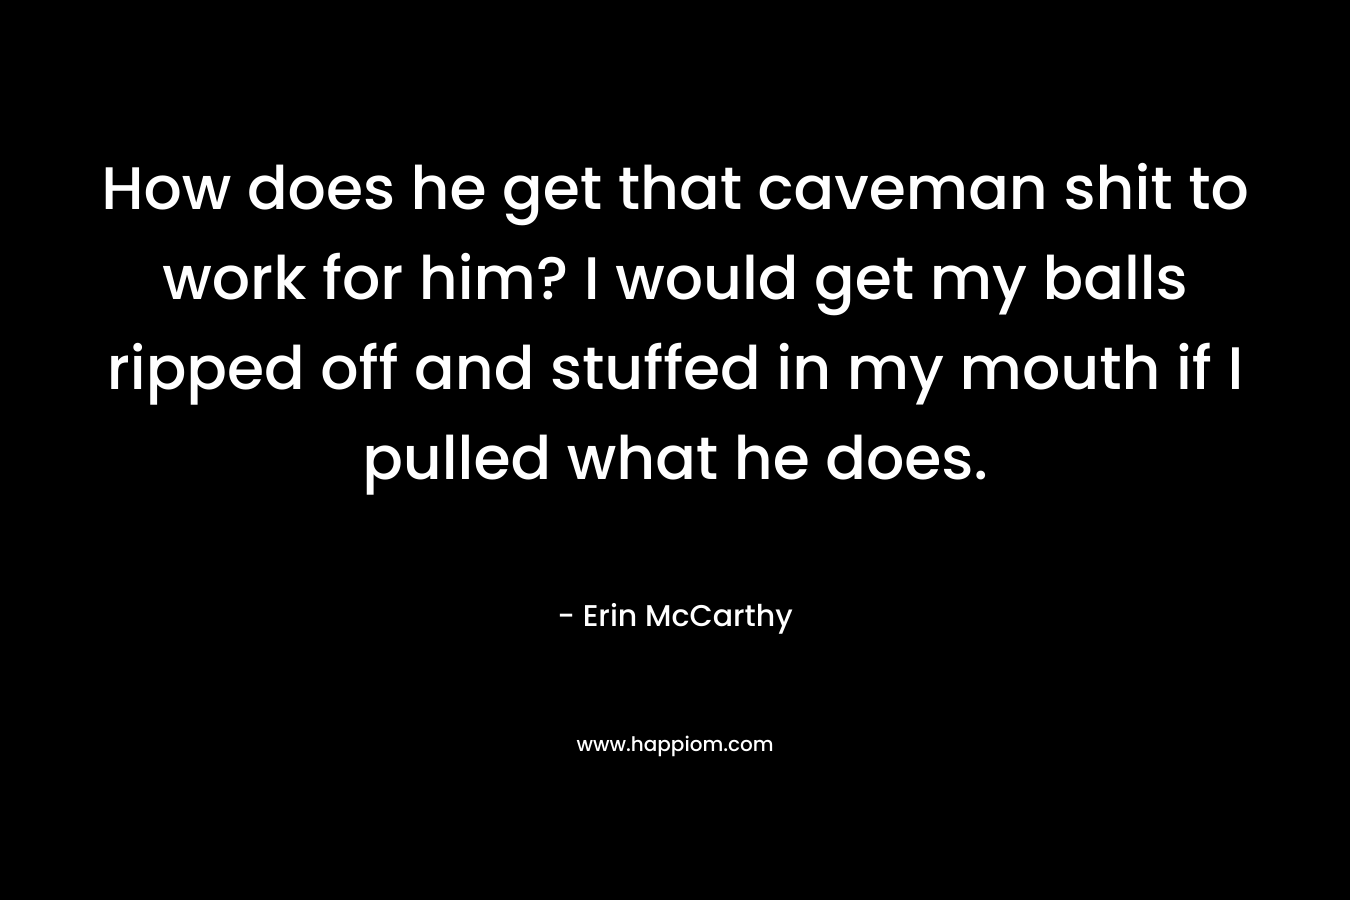 How does he get that caveman shit to work for him? I would get my balls ripped off and stuffed in my mouth if I pulled what he does. – Erin McCarthy